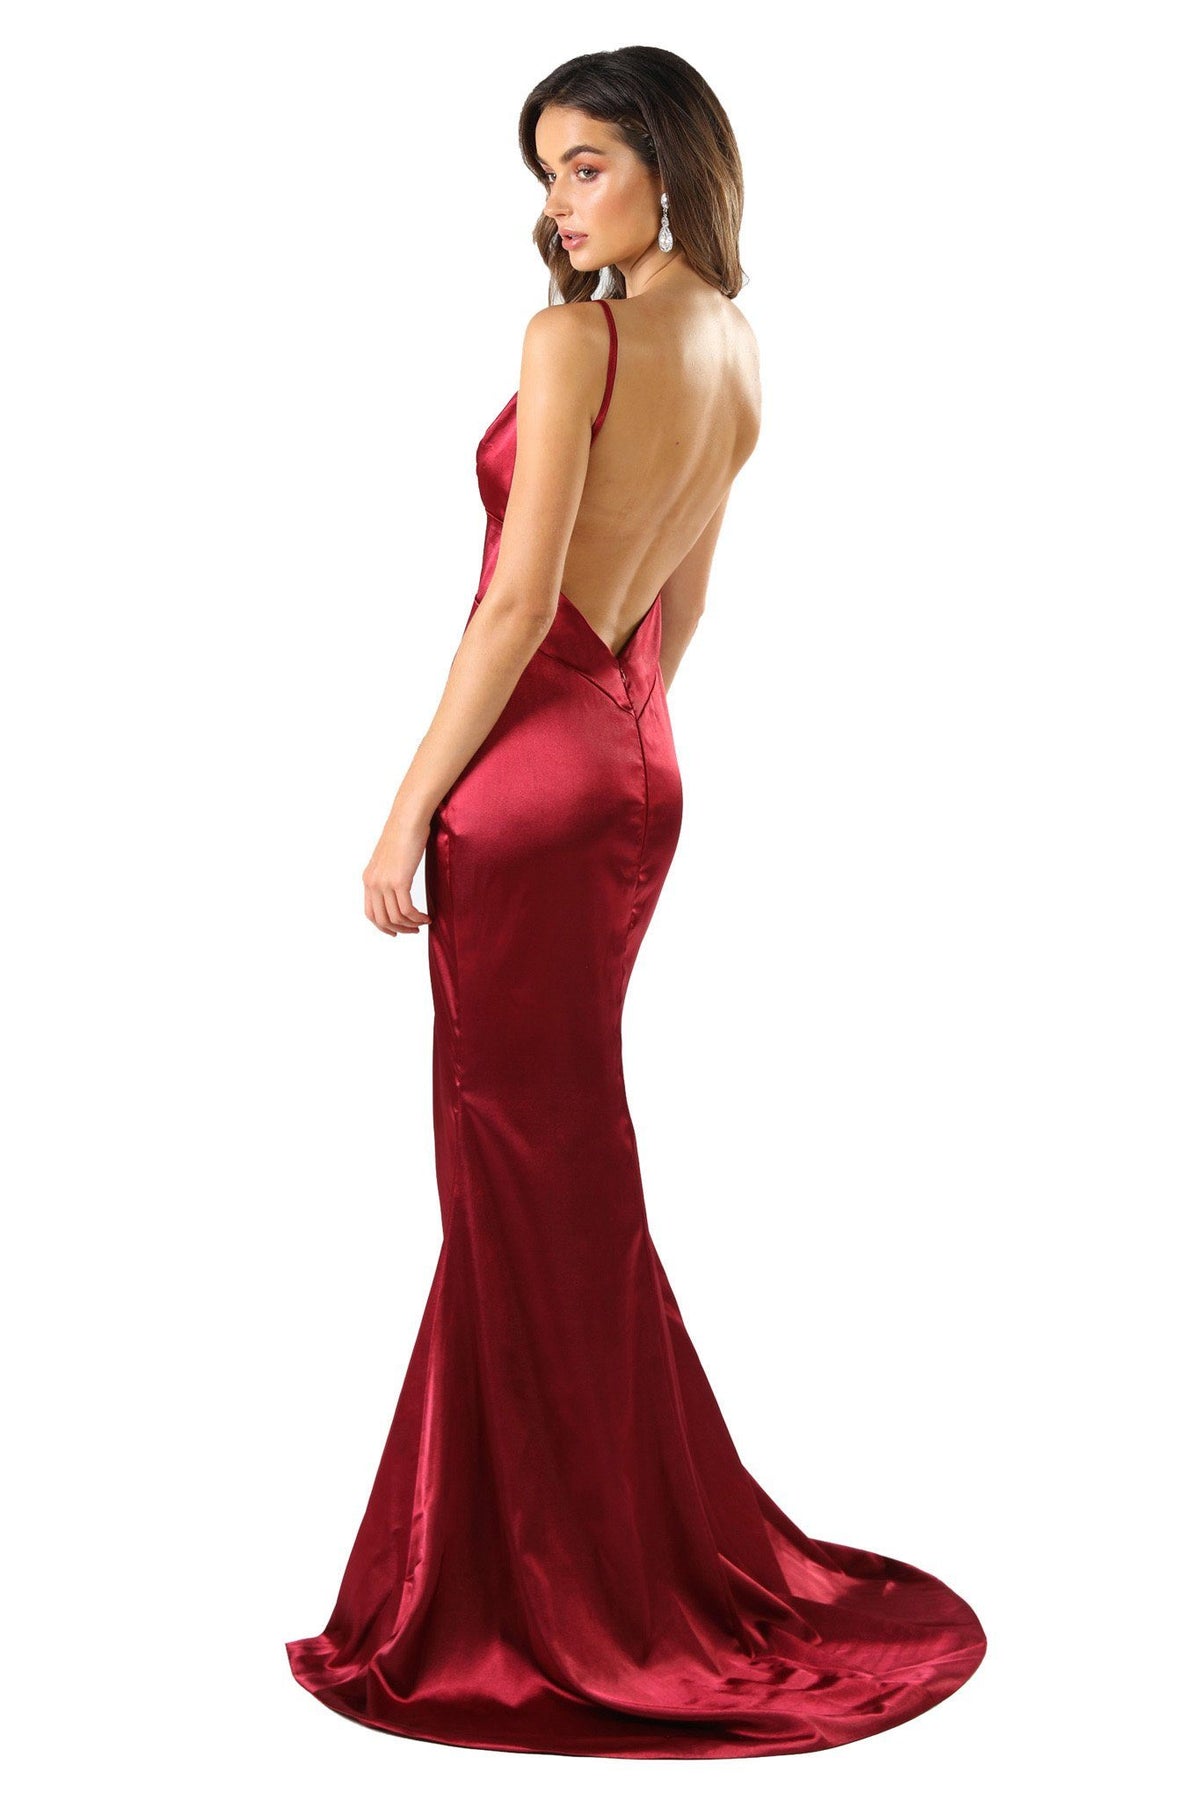 Deep red burgundy sleeveless satin formal long gown with thin shoulder straps, front thigh high slit, open back design and a long train